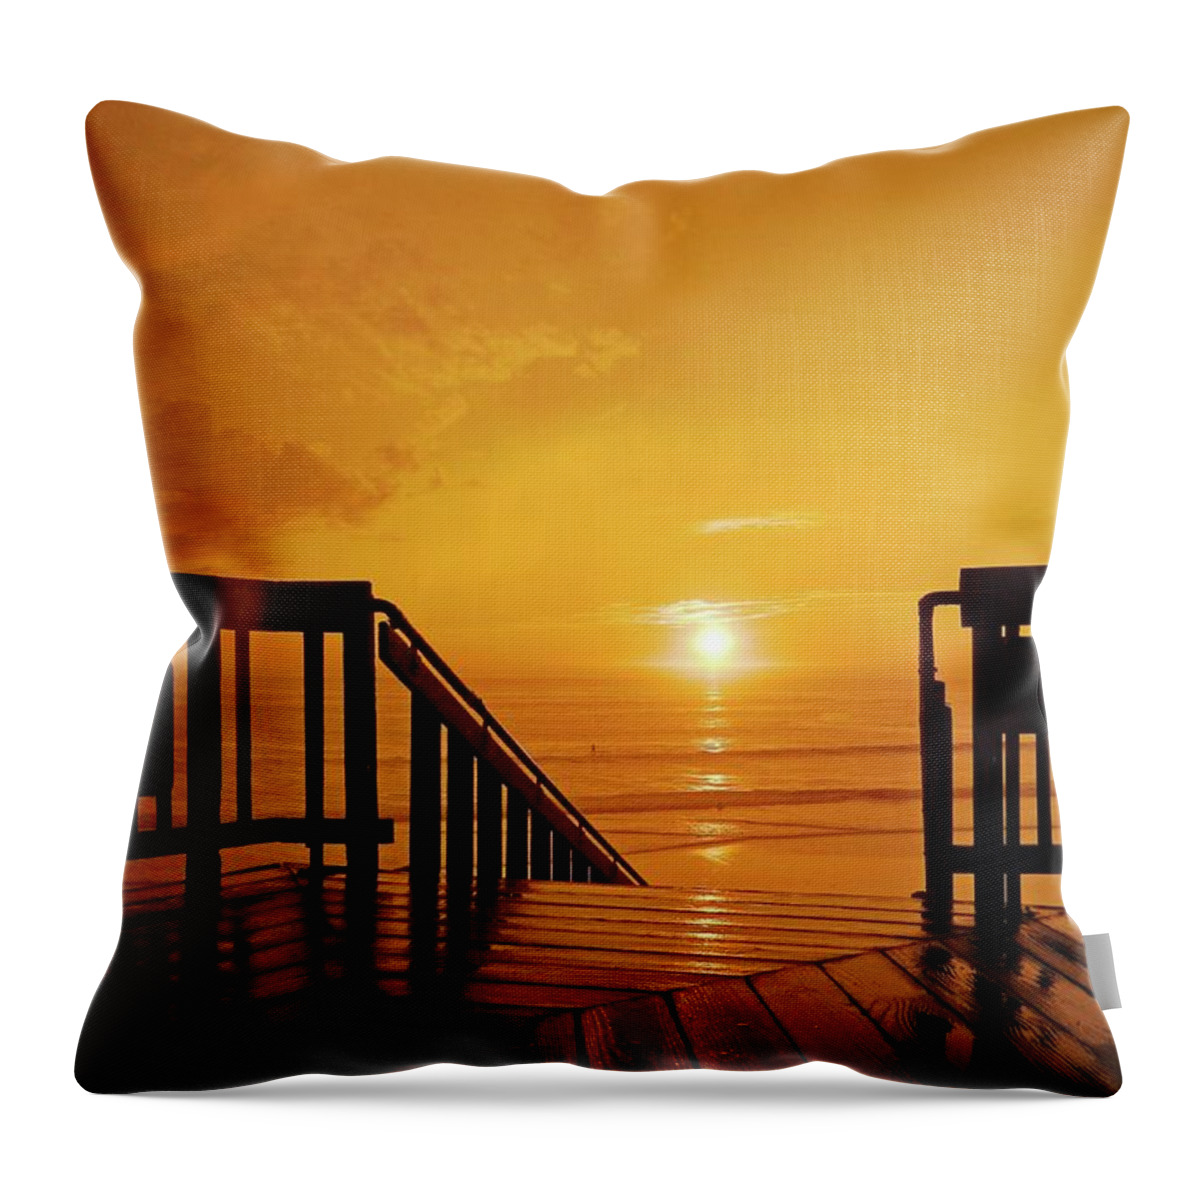 Sunset Throw Pillow featuring the photograph Stairway To Heaven by Everette McMahan jr